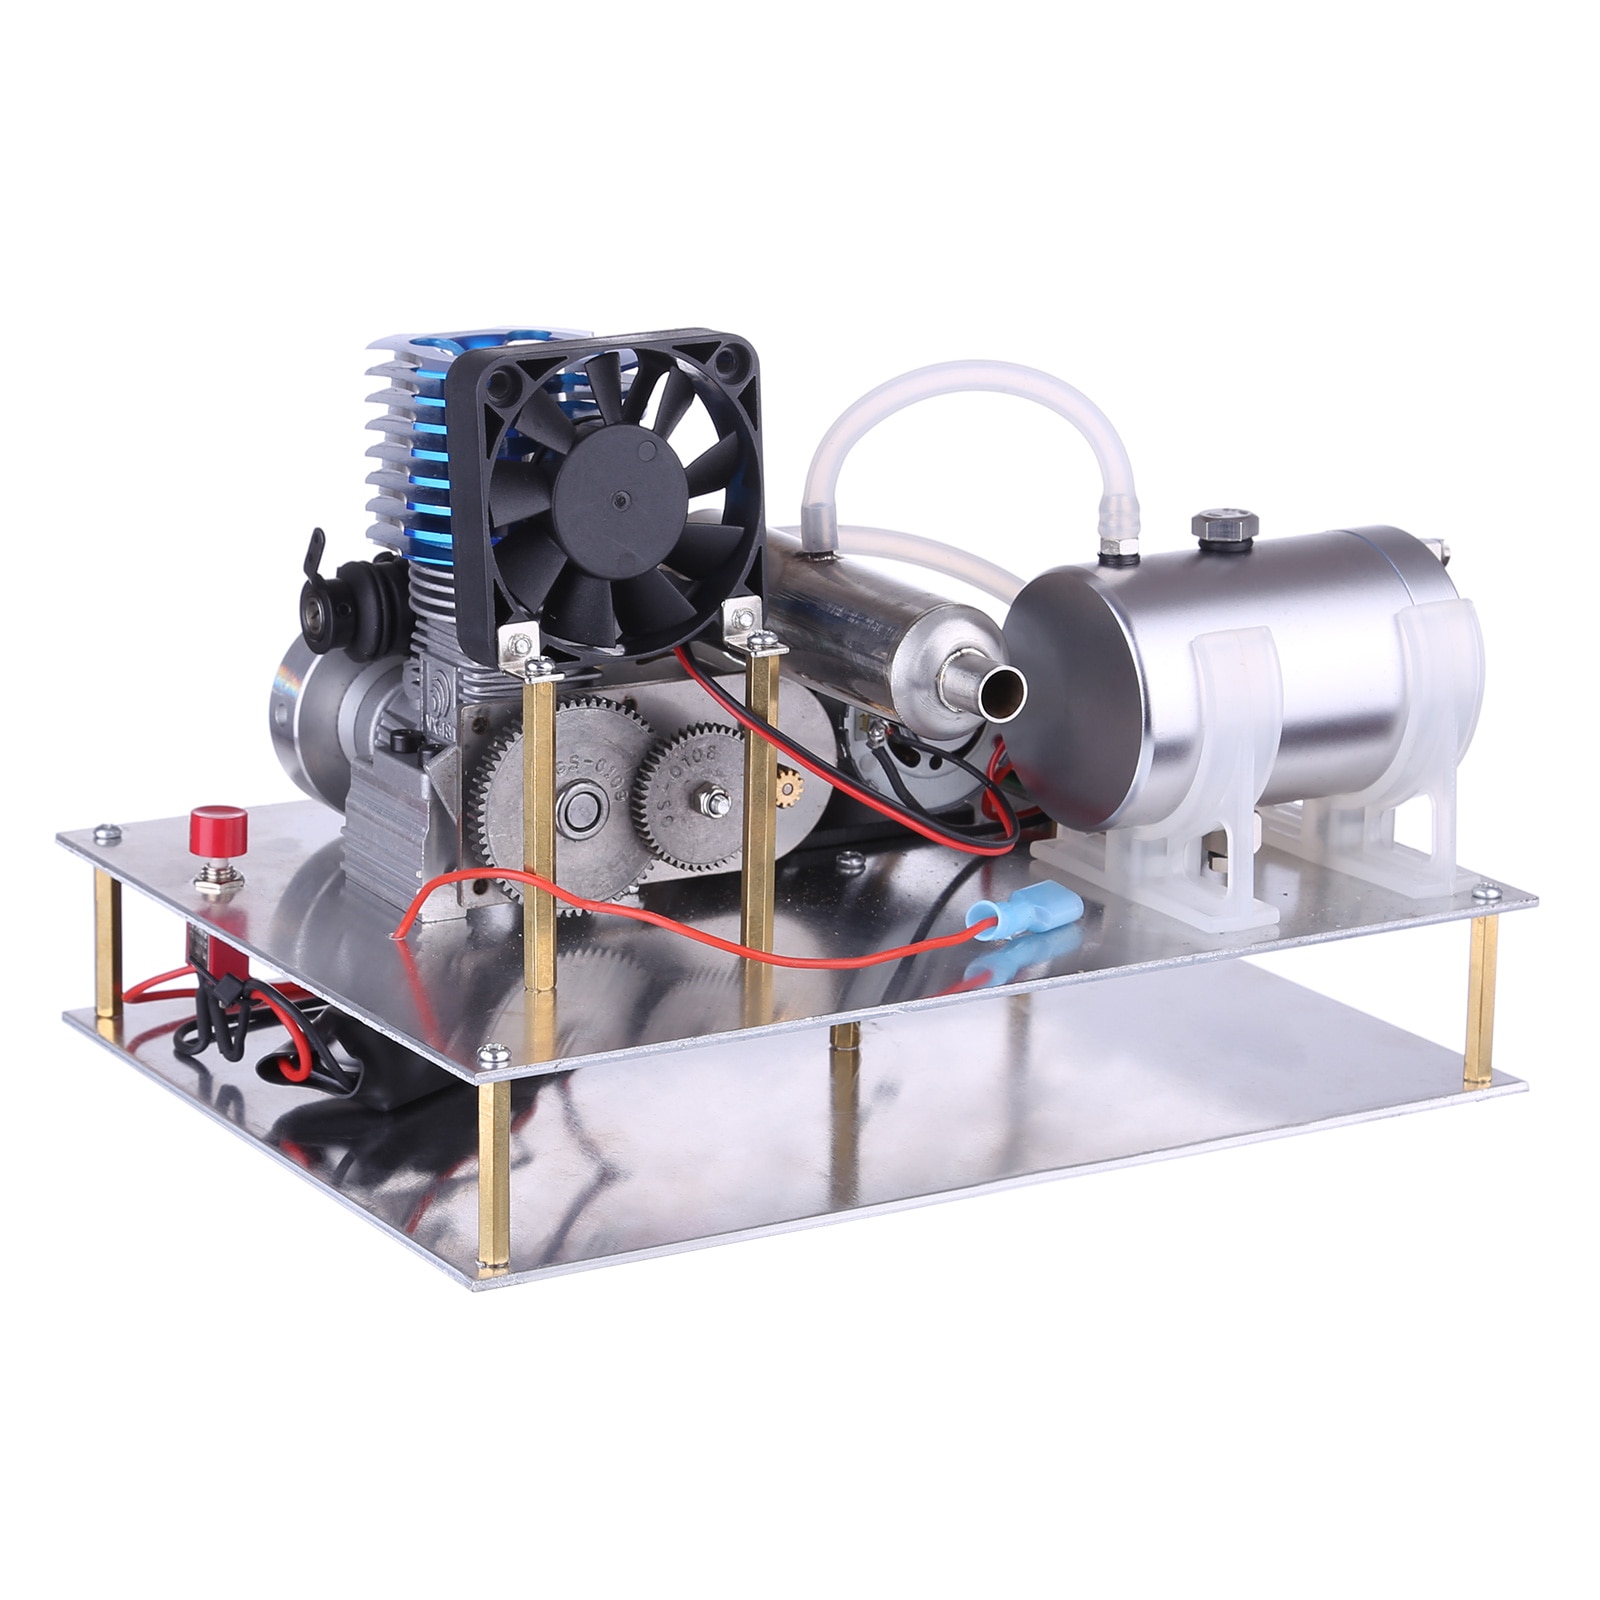 VX 18 Single Cylinder 2-stroke Air-cooled Assembled Methanol Engine Generator Model with Voltage Digital Display and Dual USB 4